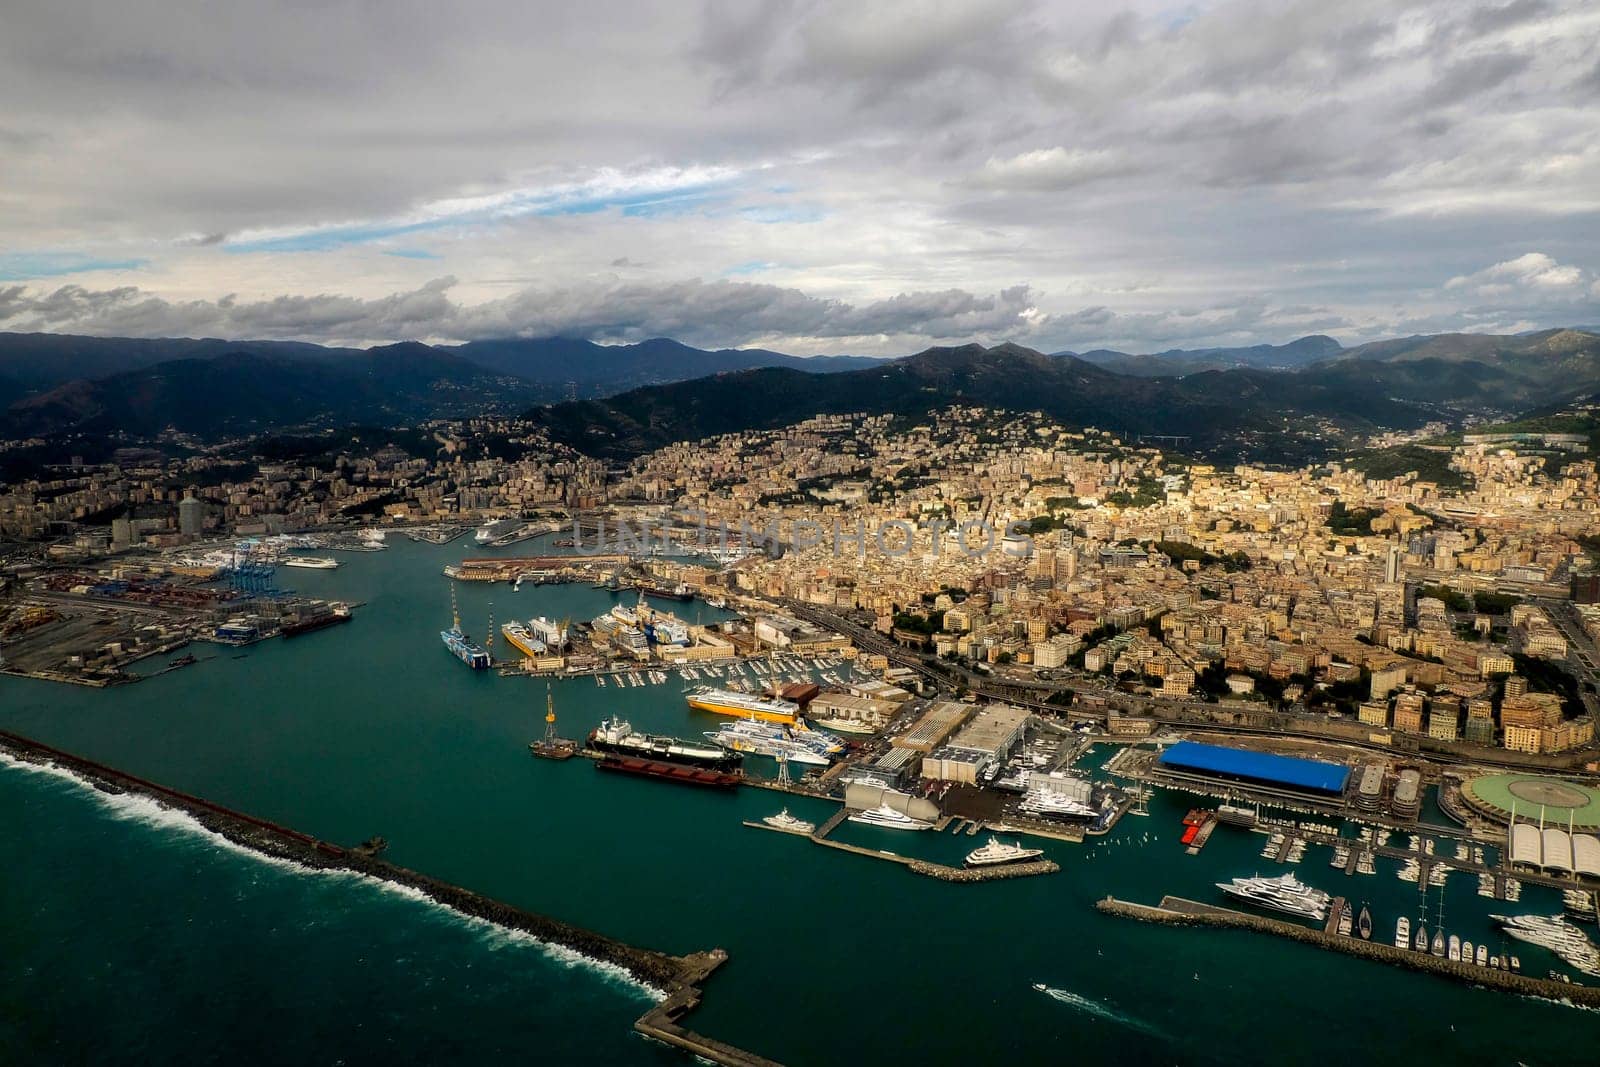 Foce Genoa Italy aerial view before landing to airport by airplane during a sea storm tempest hurricane